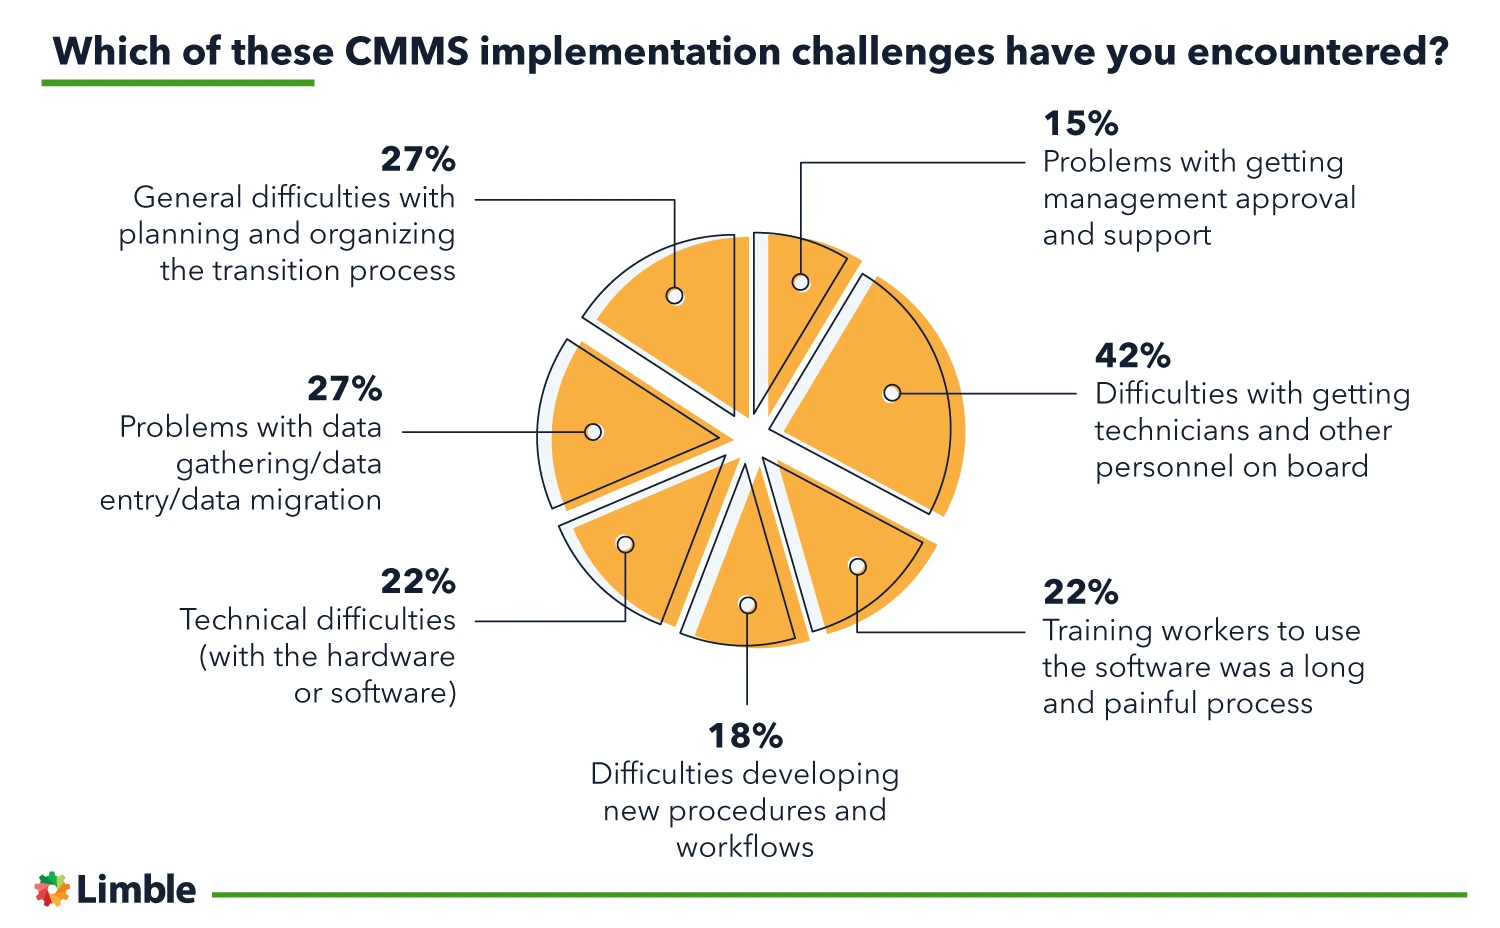 CMMS implementation challenges